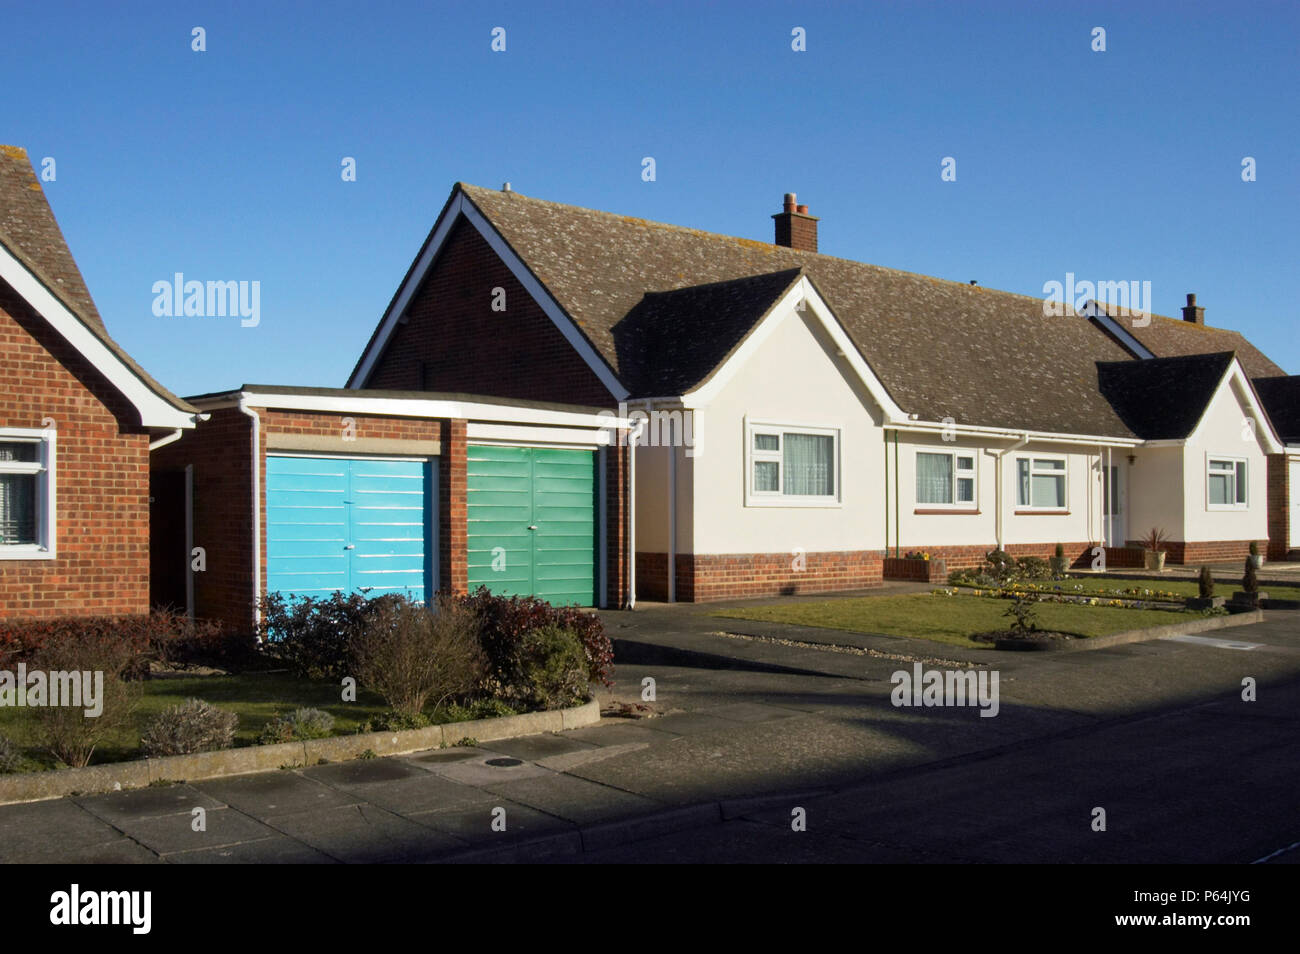 Residential housing and garages in UK Stock Photo